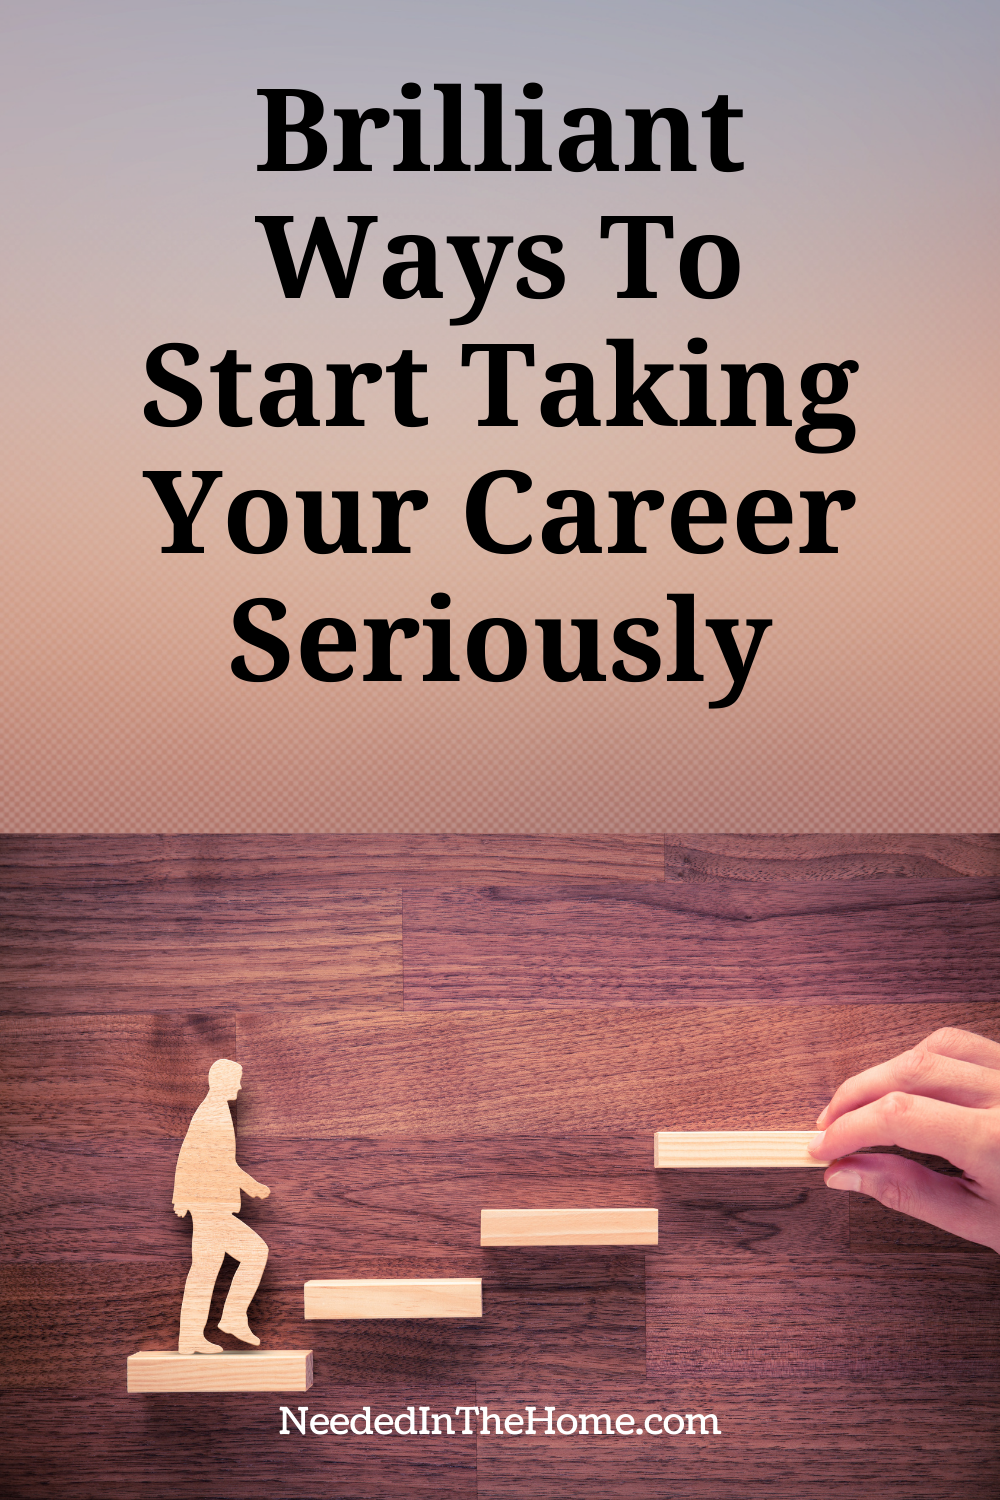 pinterest-pin-description brilliant ways to start taking your career seriously wood man step up corporate ladder human hand neededinthehome